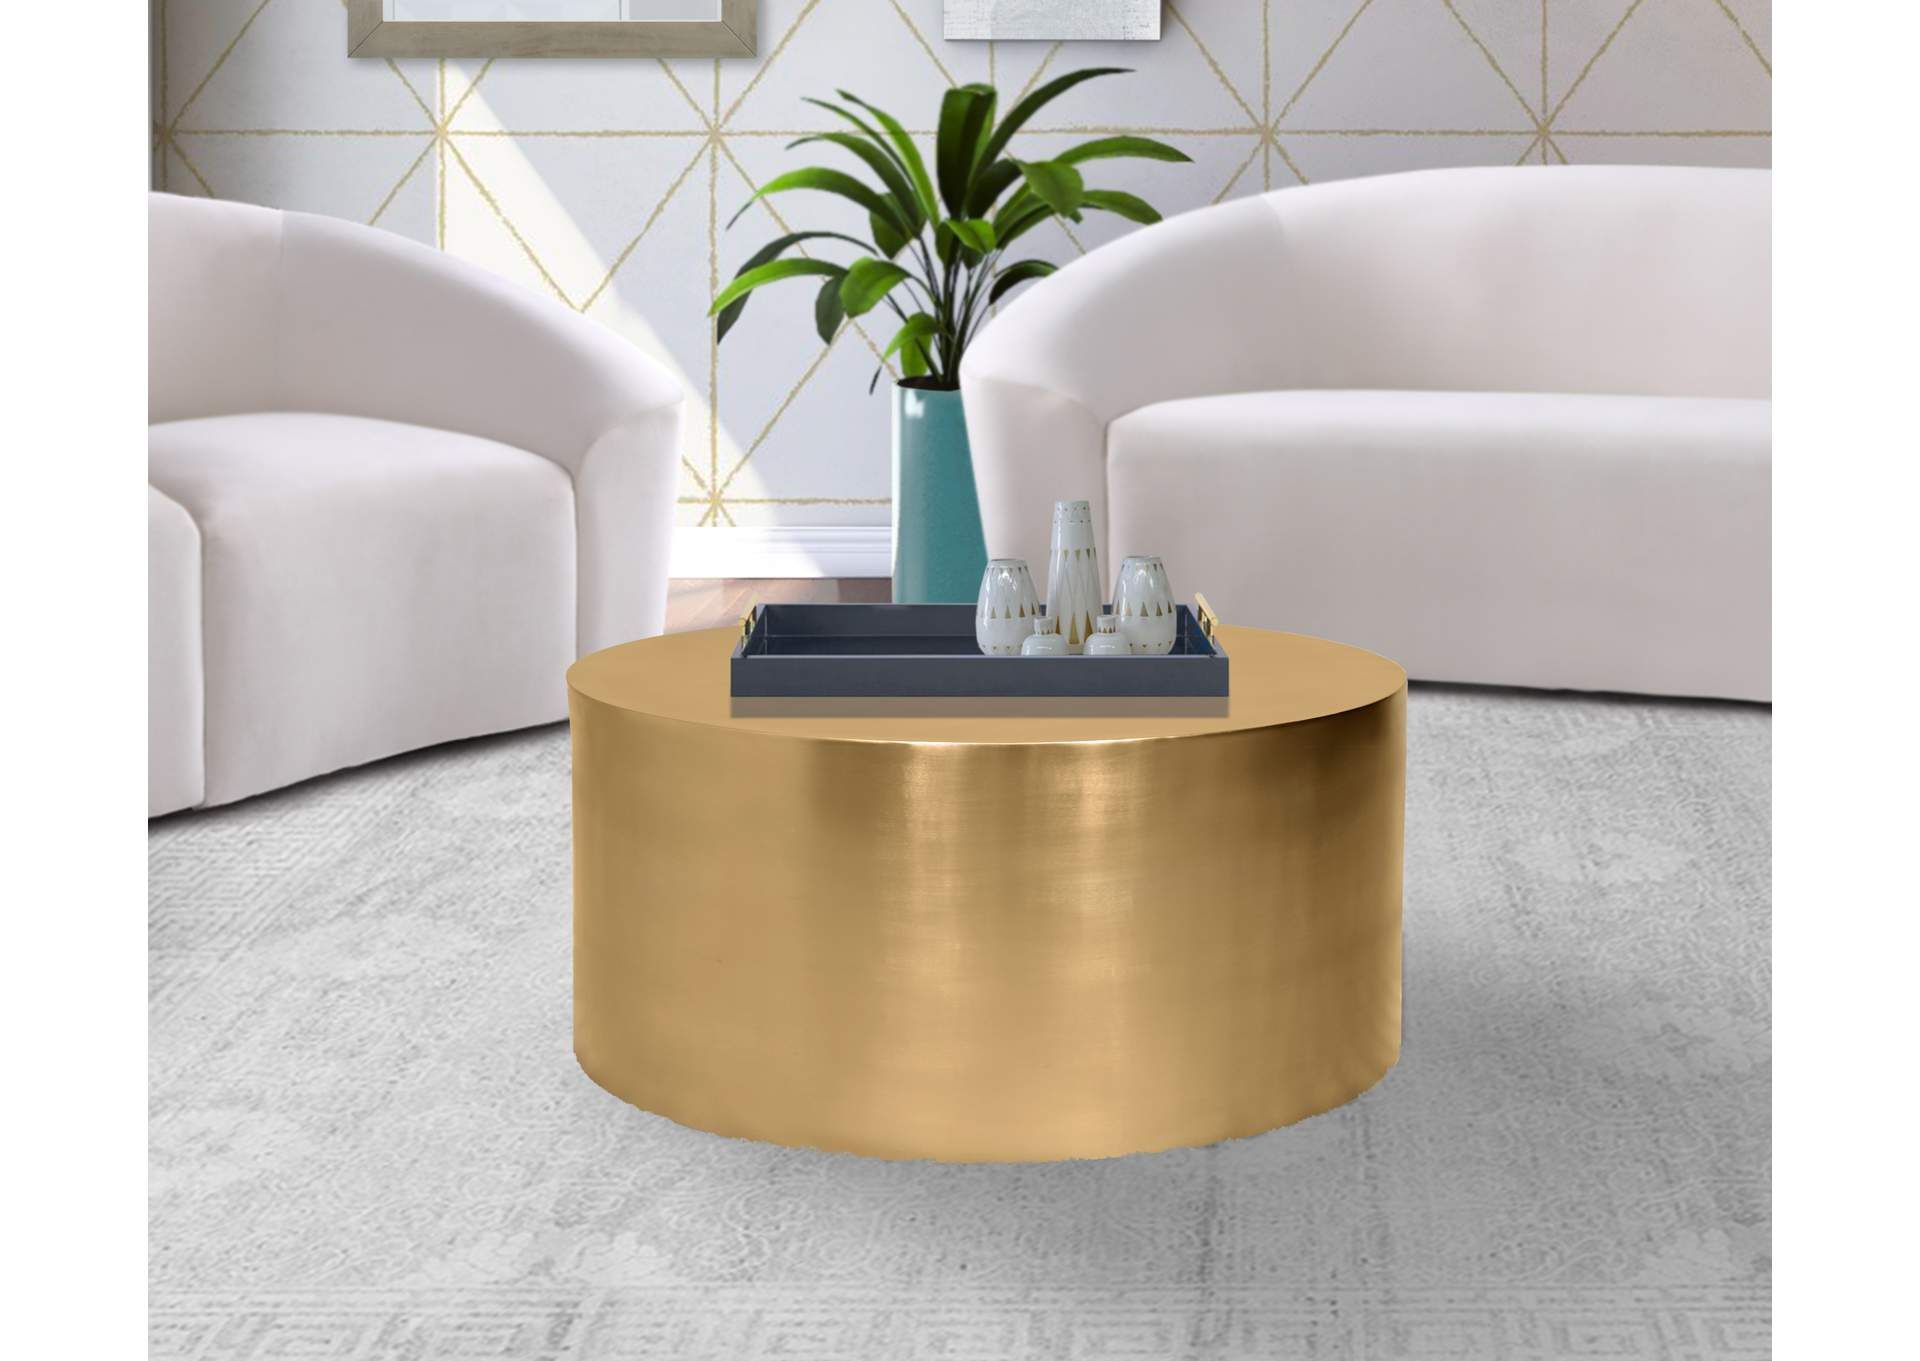 Cylinder Brushed Gold Coffee Table Harlem Furniture Throughout Satin Gold Coffee Tables (View 14 of 20)